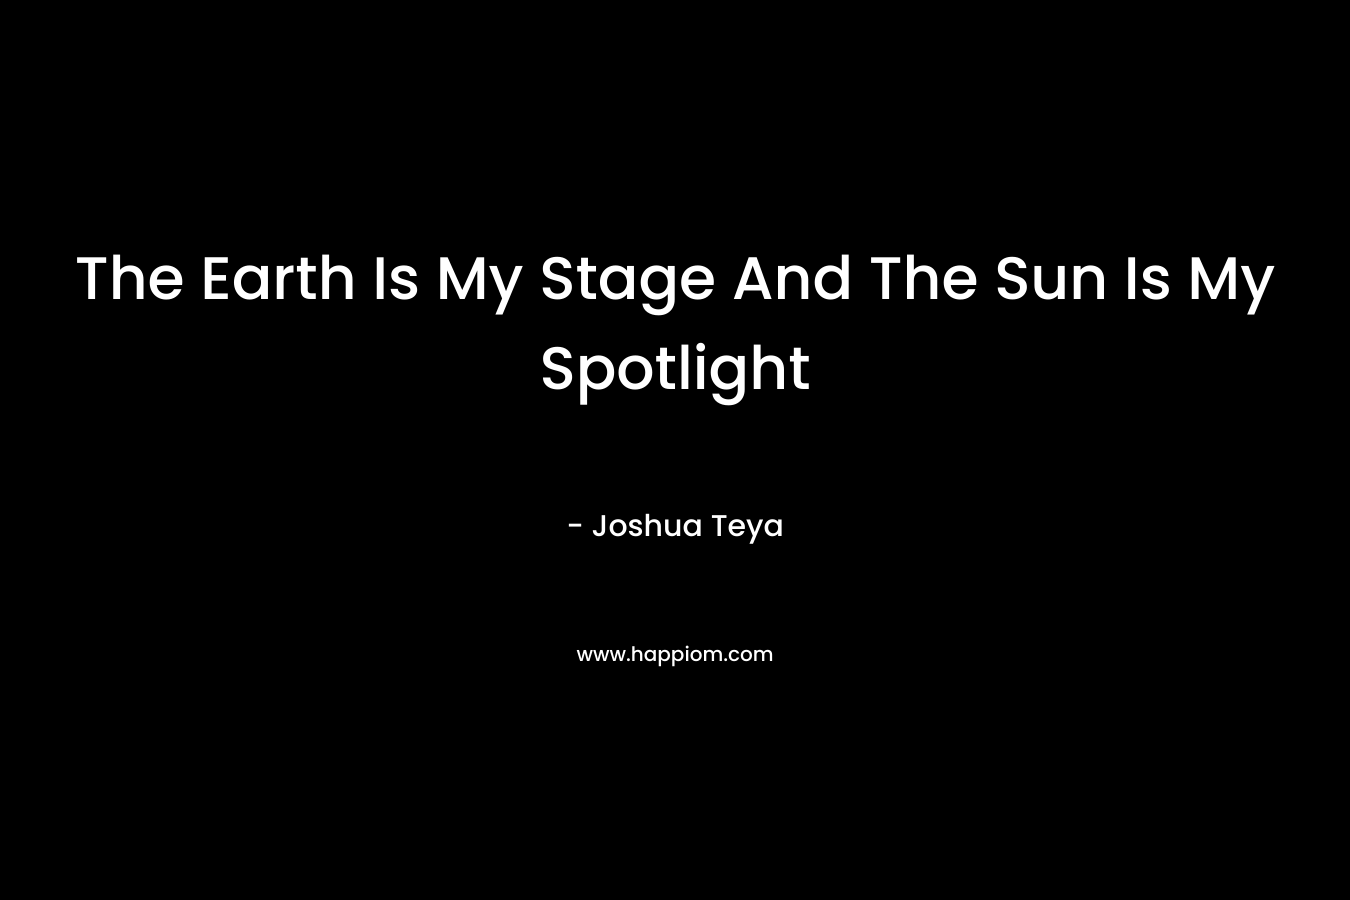 The Earth Is My Stage And The Sun Is My Spotlight